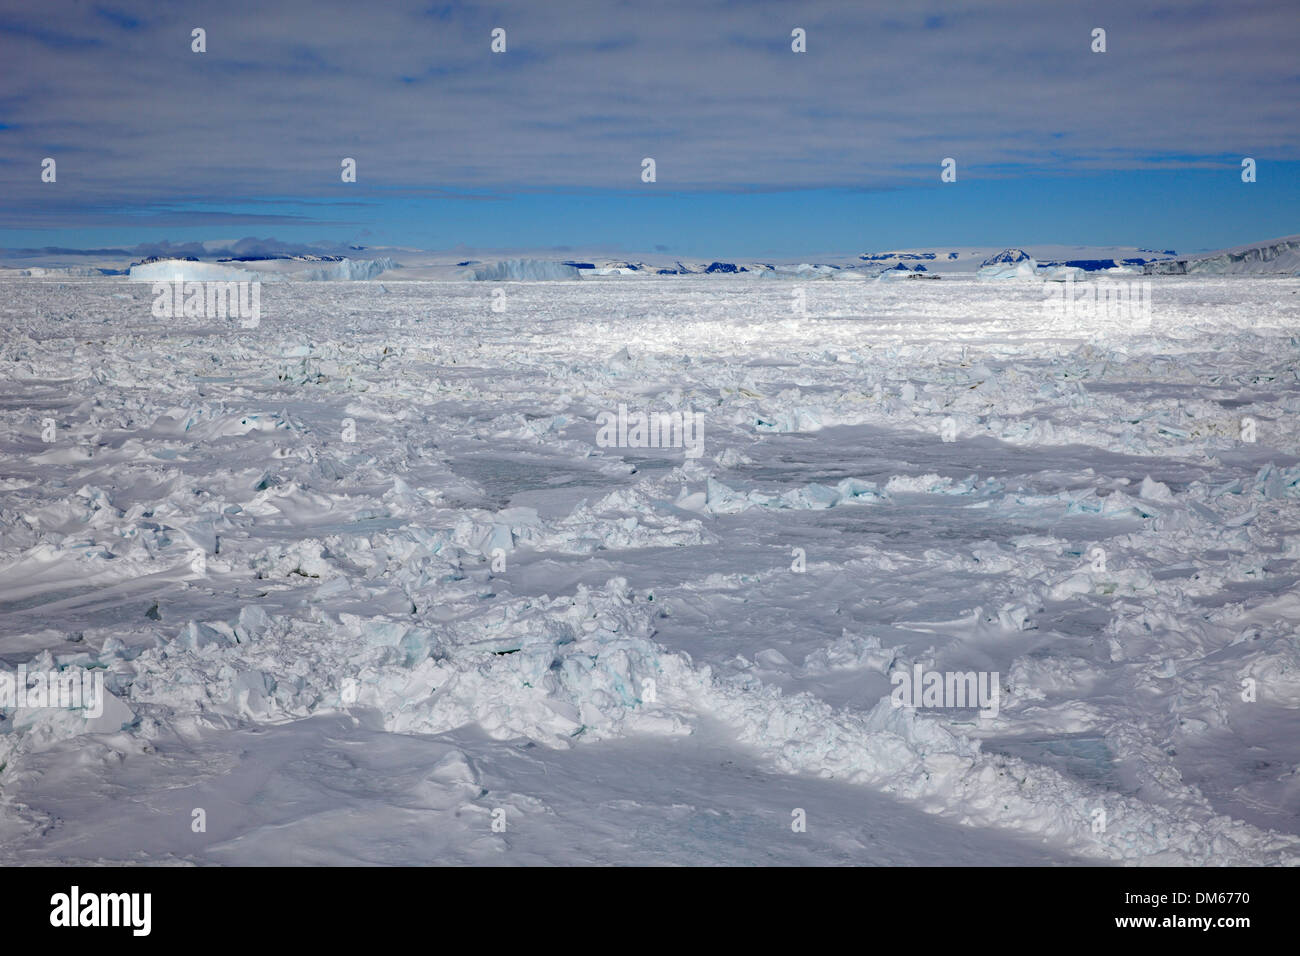 Icy landscape, pack ice, Weddell Sea, Antarctica Stock Photo